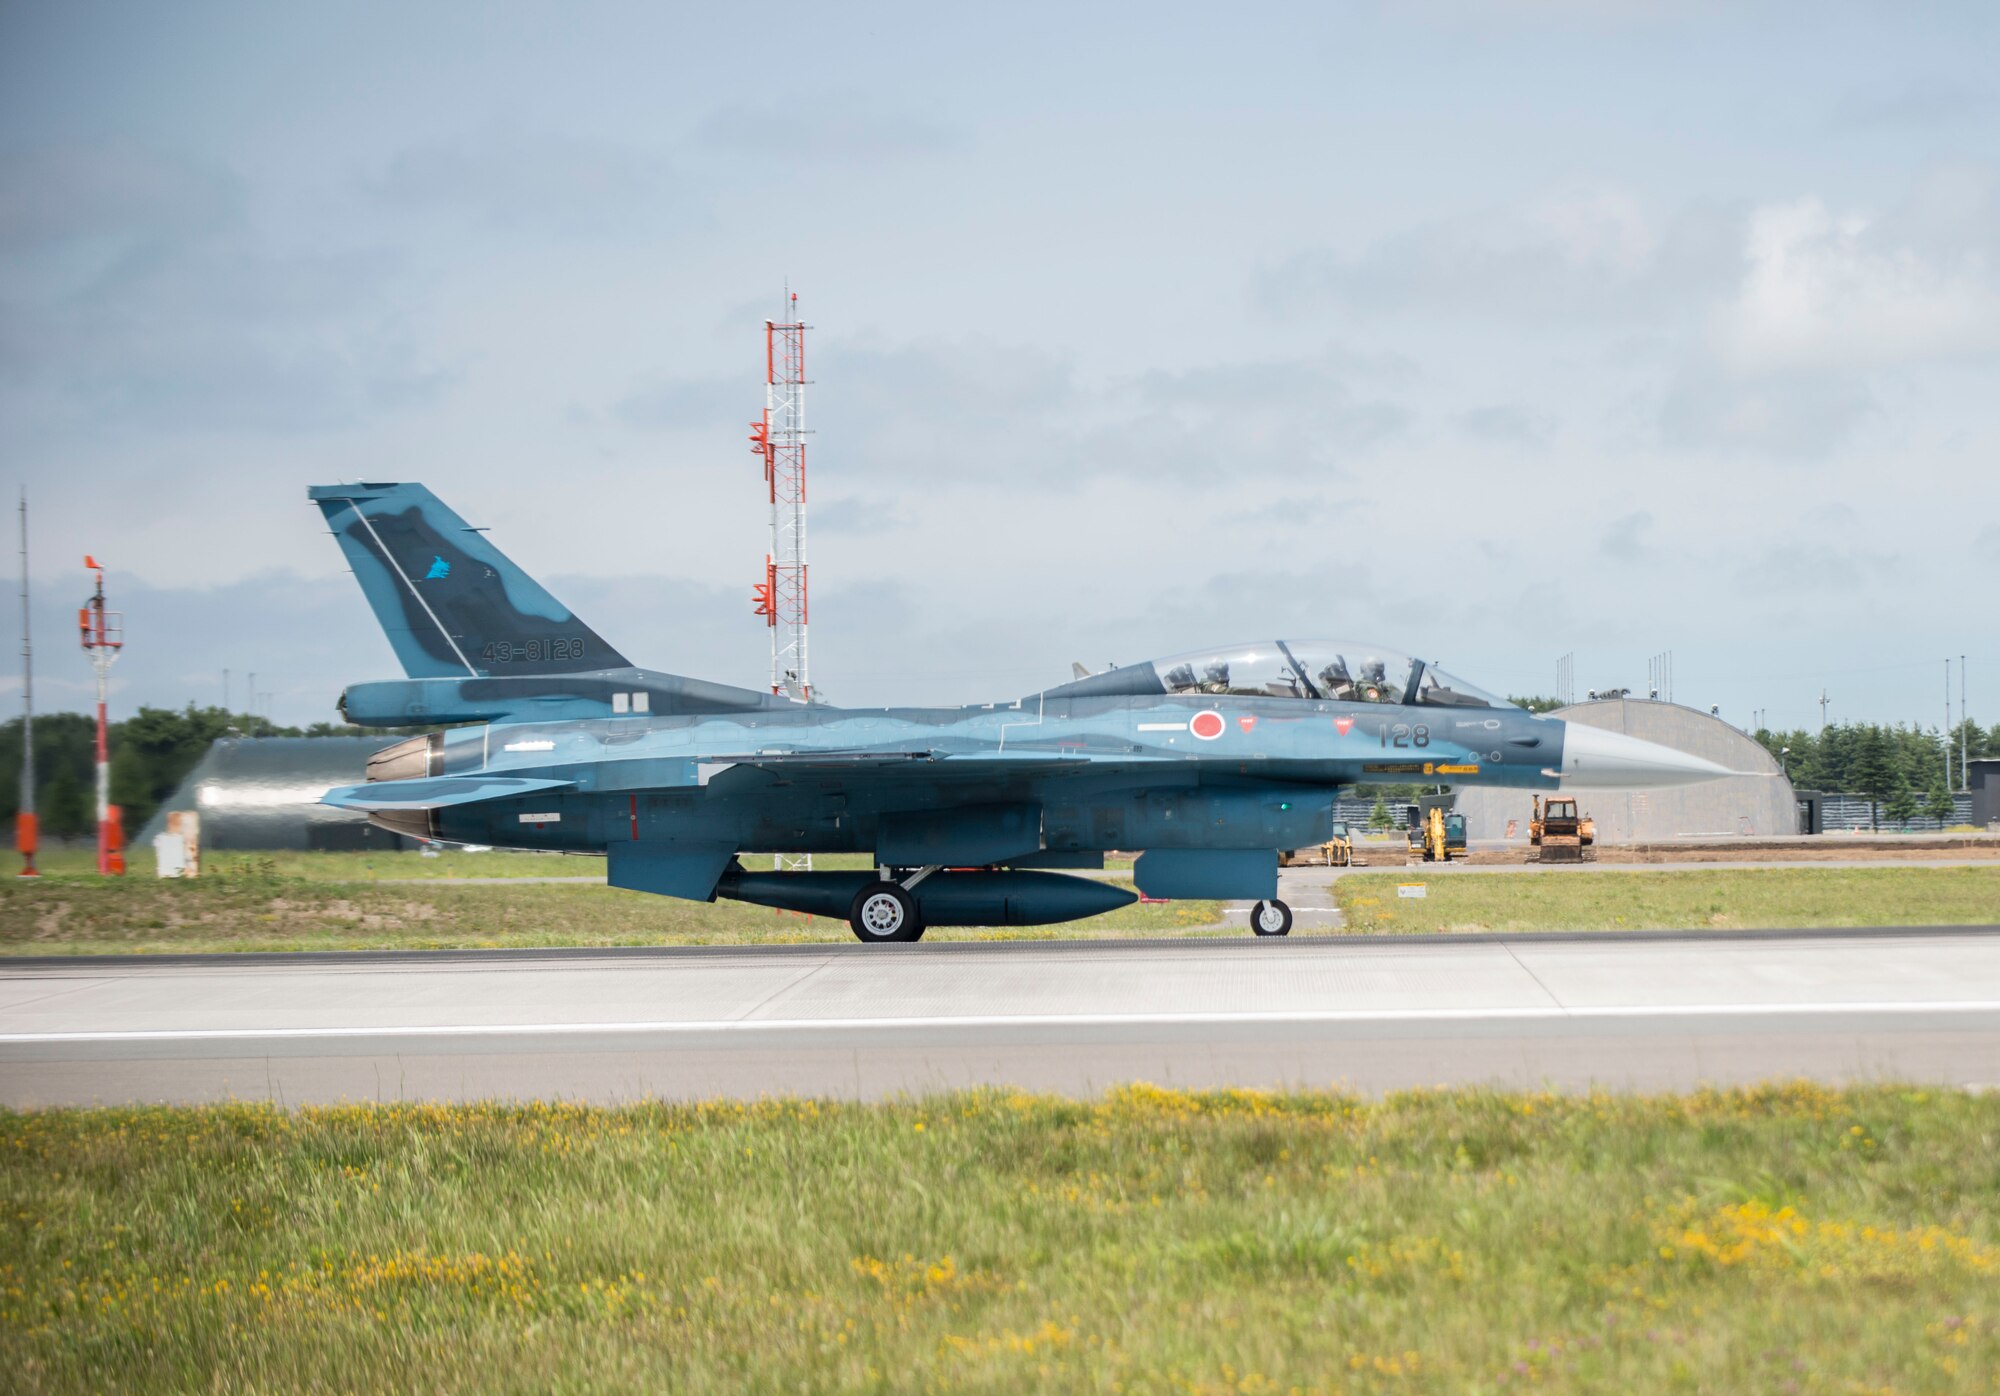 U.S. Air Force Col. Timothy Sundvall, the commander of the 35th Fighter Wing, and Lt. Col. Mikio Kobayashi, the commander of the 3rd Fighter Squadron, take off in an F-2A at Misawa Air Base, Japan, June 22, 2016. This was the first flight for Sundvall in an F-2A which is able to reach a max speed of Mach 2. (U.S. Air Force photo by Senior Airman Brittany A. Chase)